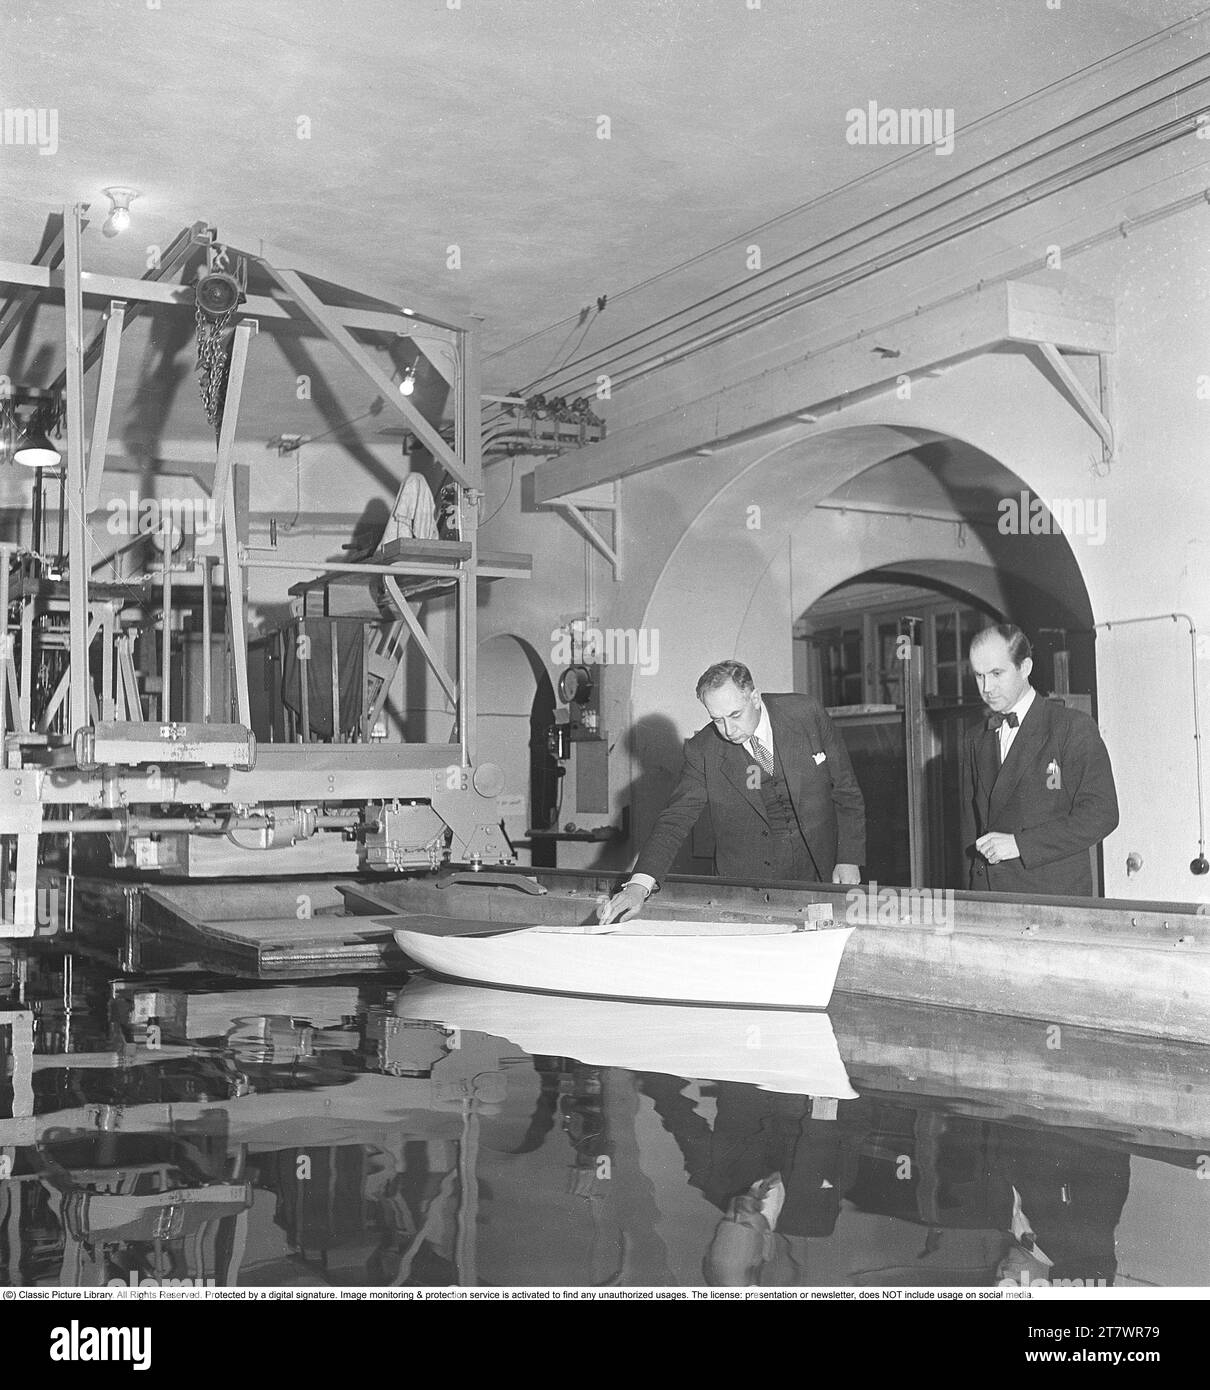 Advanced laboratory experiments in the 1940s. Interior of a room where a model ship lies in a pool of water. When the ship model is pulled forward on the surface of the water in the basin, one studies how the surge waves and how the ship behaves and whether the hull design is successful or not. The test is necessary to test safety, design, eco-economy and performance, and affects how the ship will ultimately look and how the hull will be constructed. Sweden 1949. Kristoffersson ref AU51-3 Stock Photo